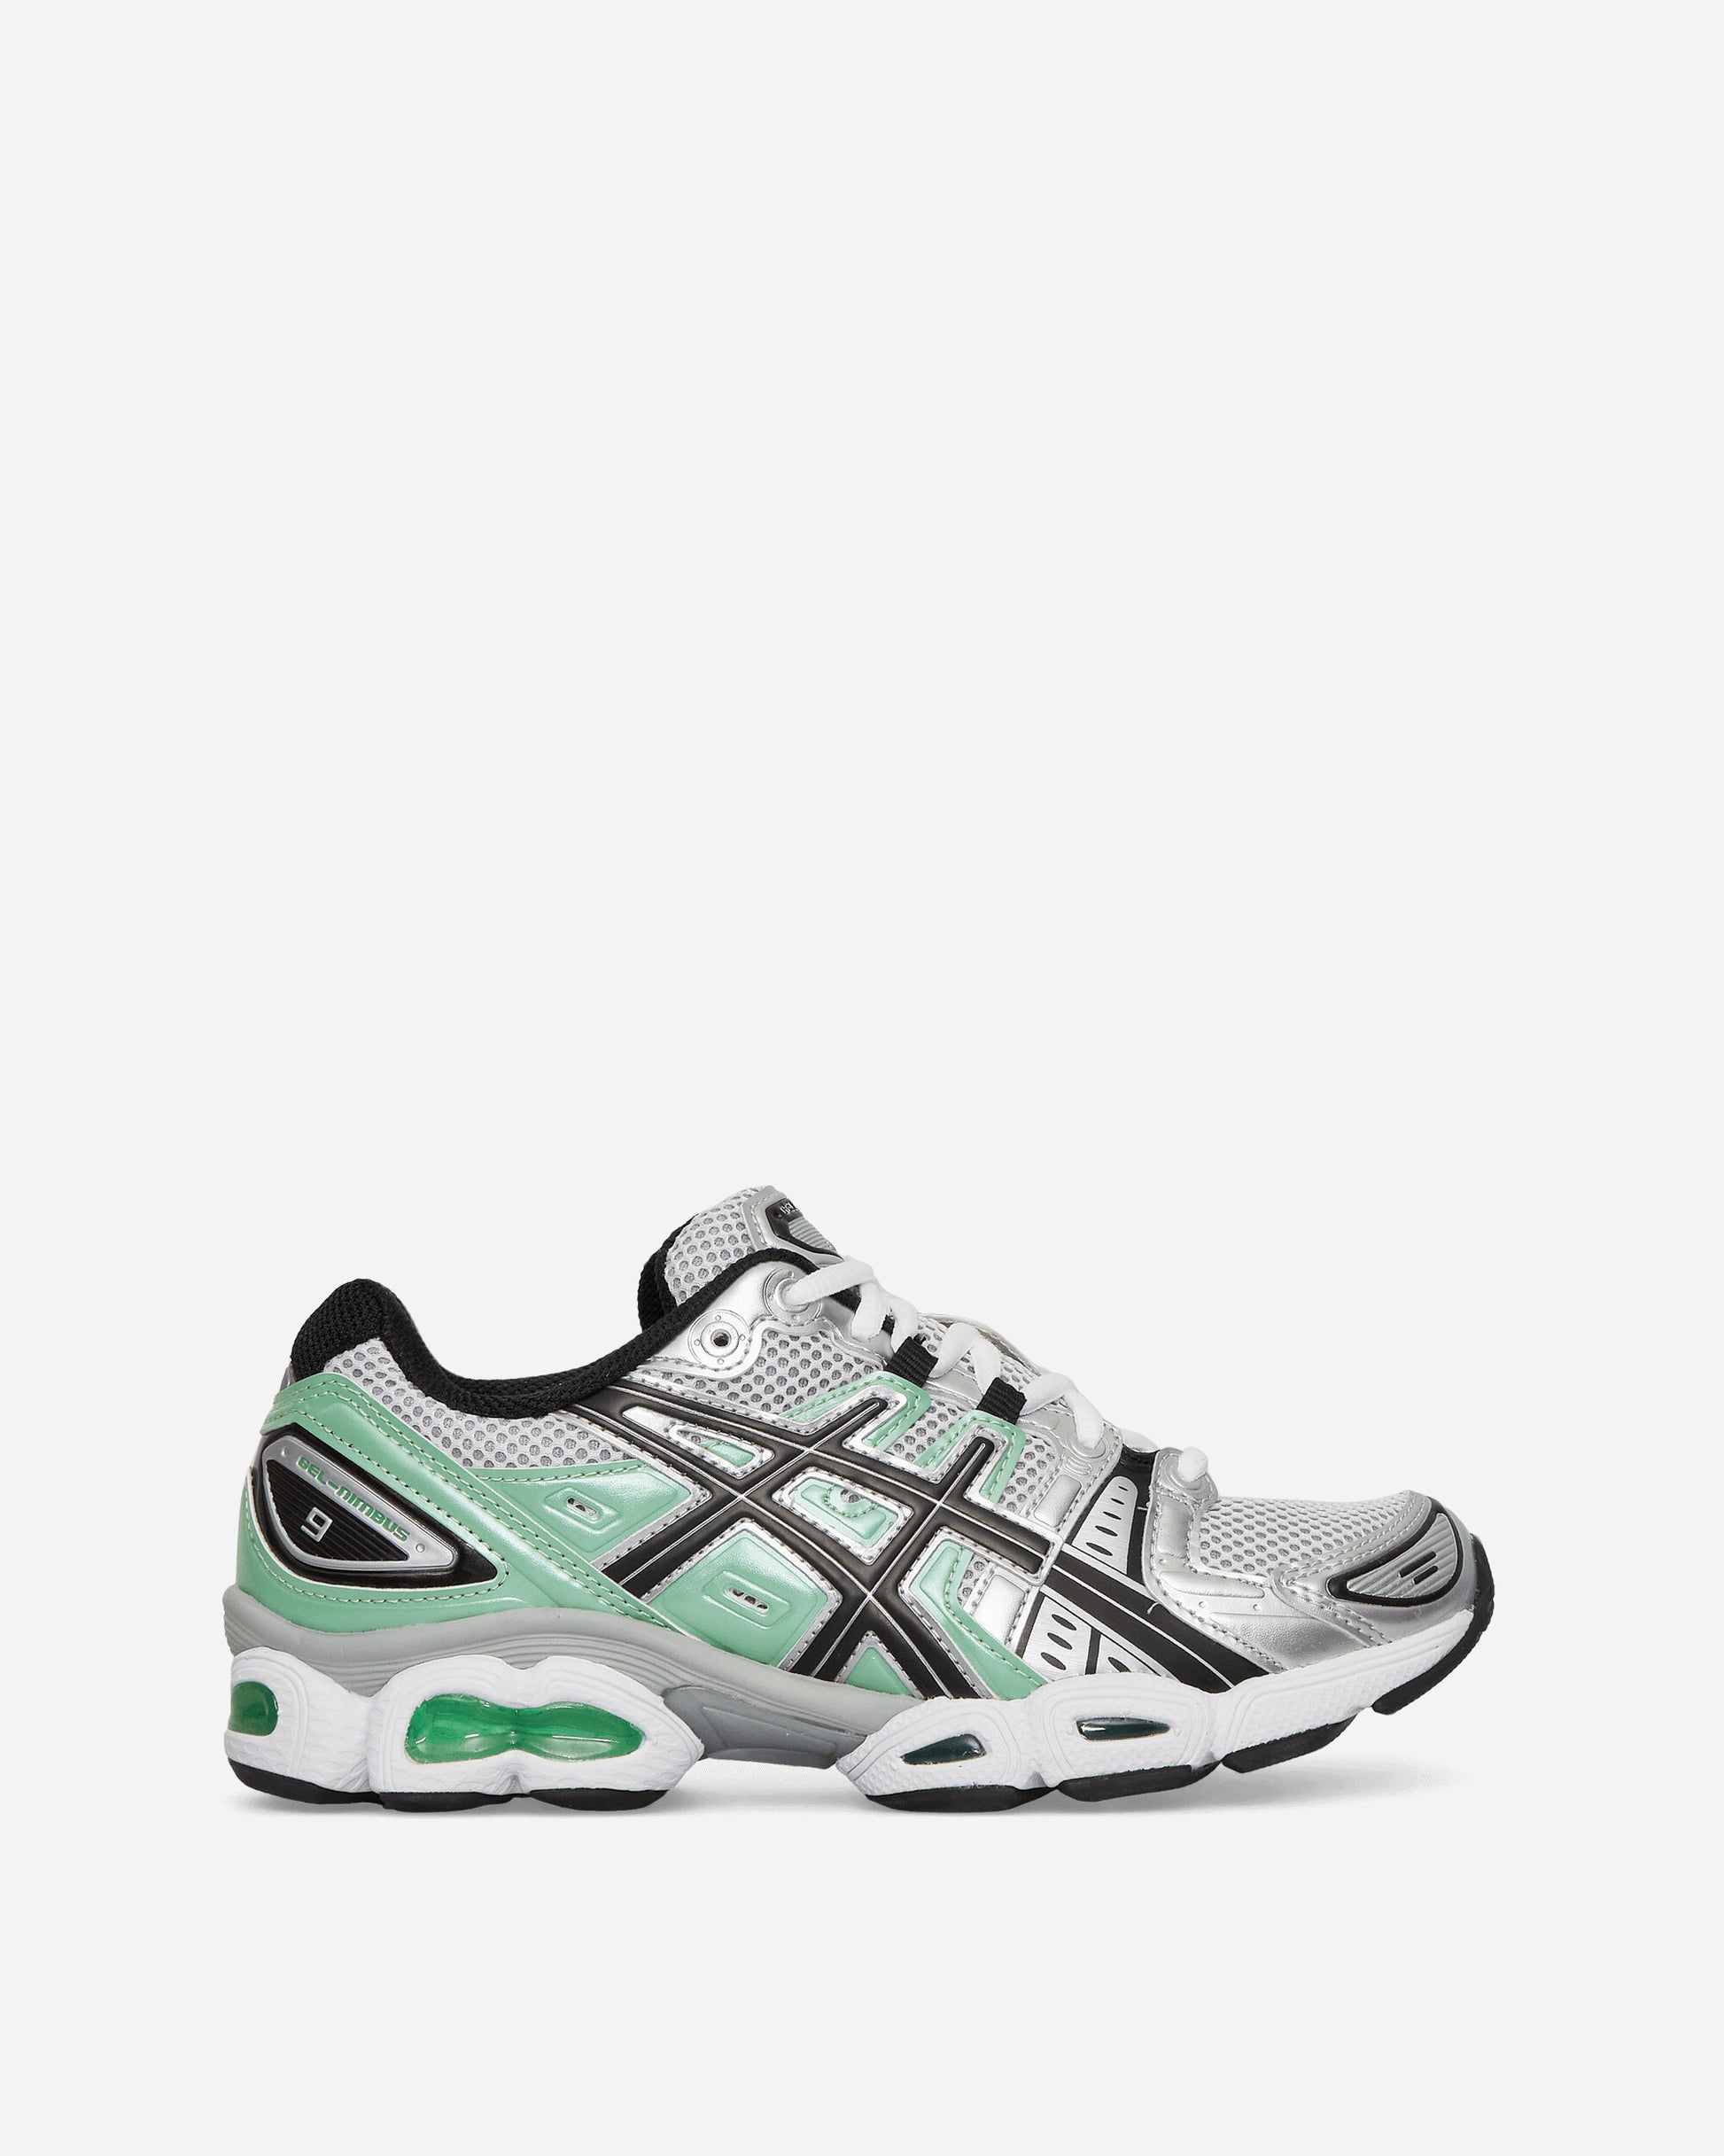 Asics Wmns Gel-Nimbus 9 White/Bamboo Sneakers Low 1202A278-109